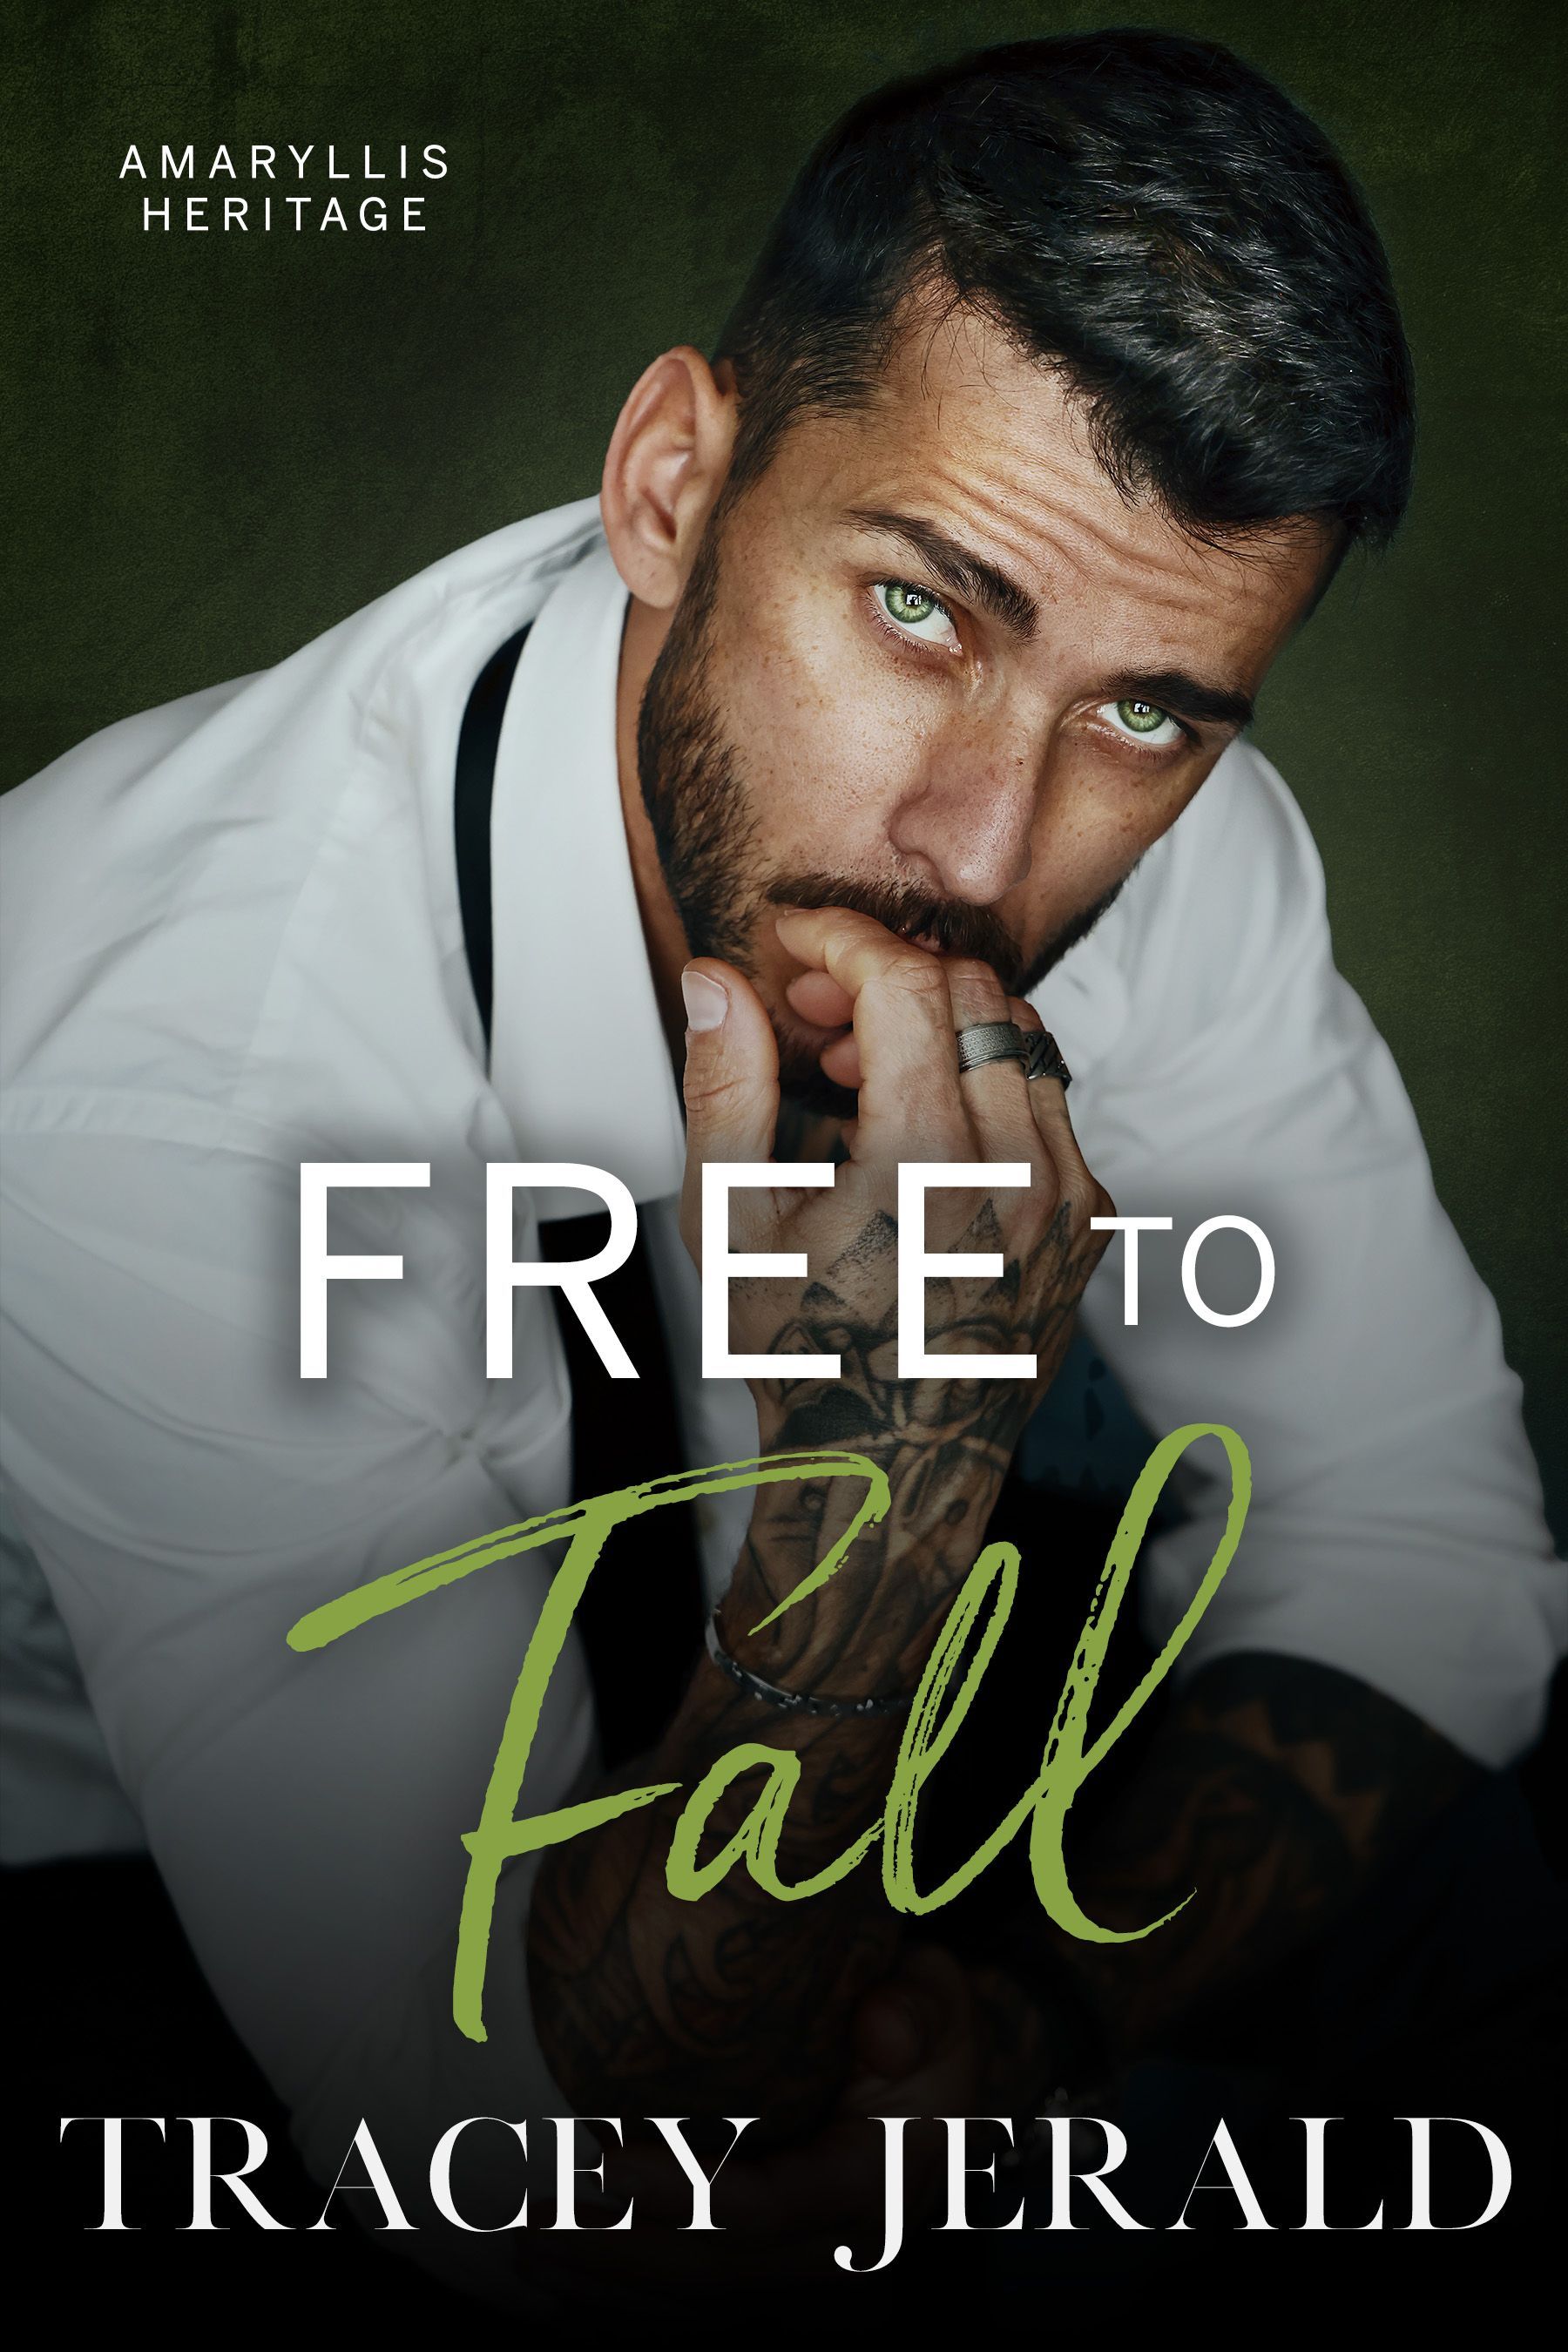 A book called Free to Fall by Tracey Jerald